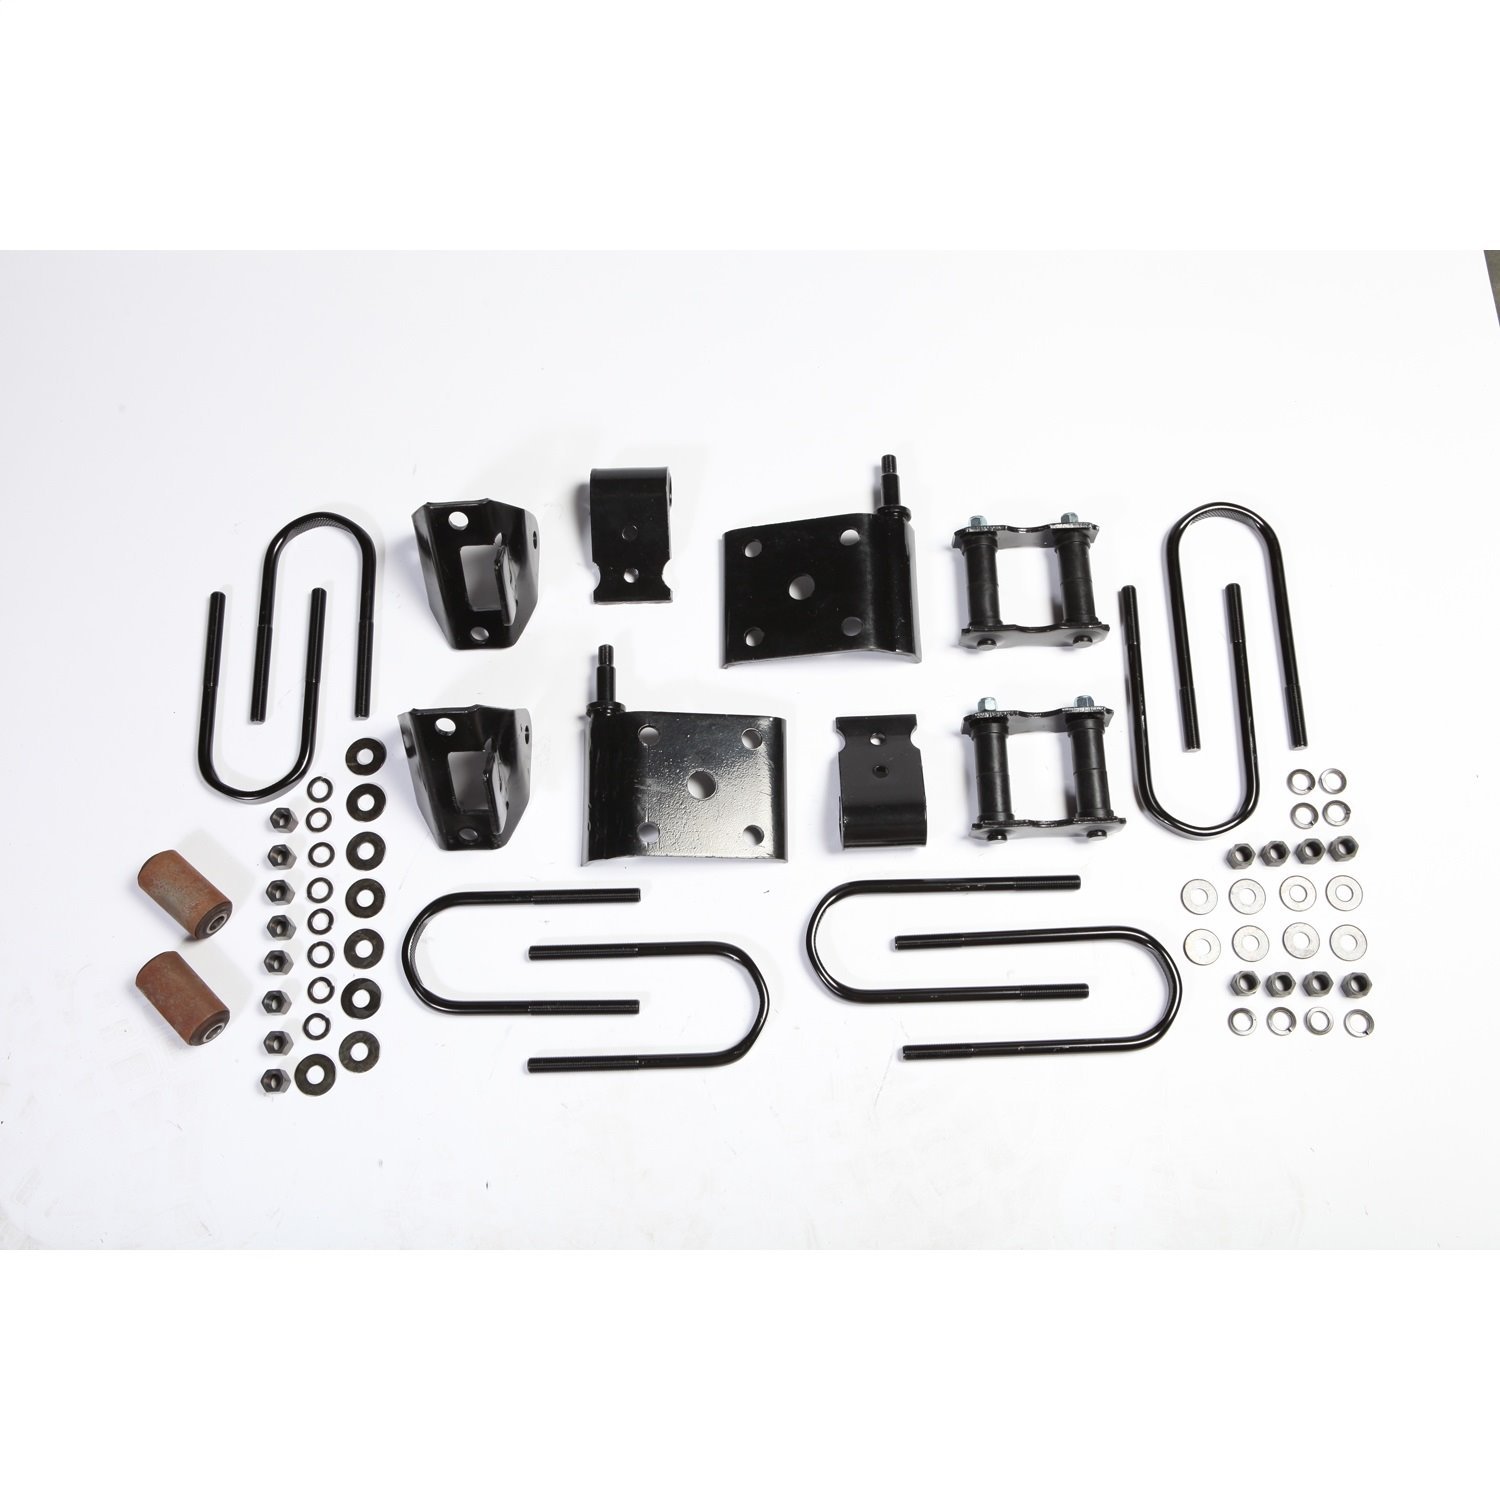 This rear leaf spring mounting kit from Omix-ADA